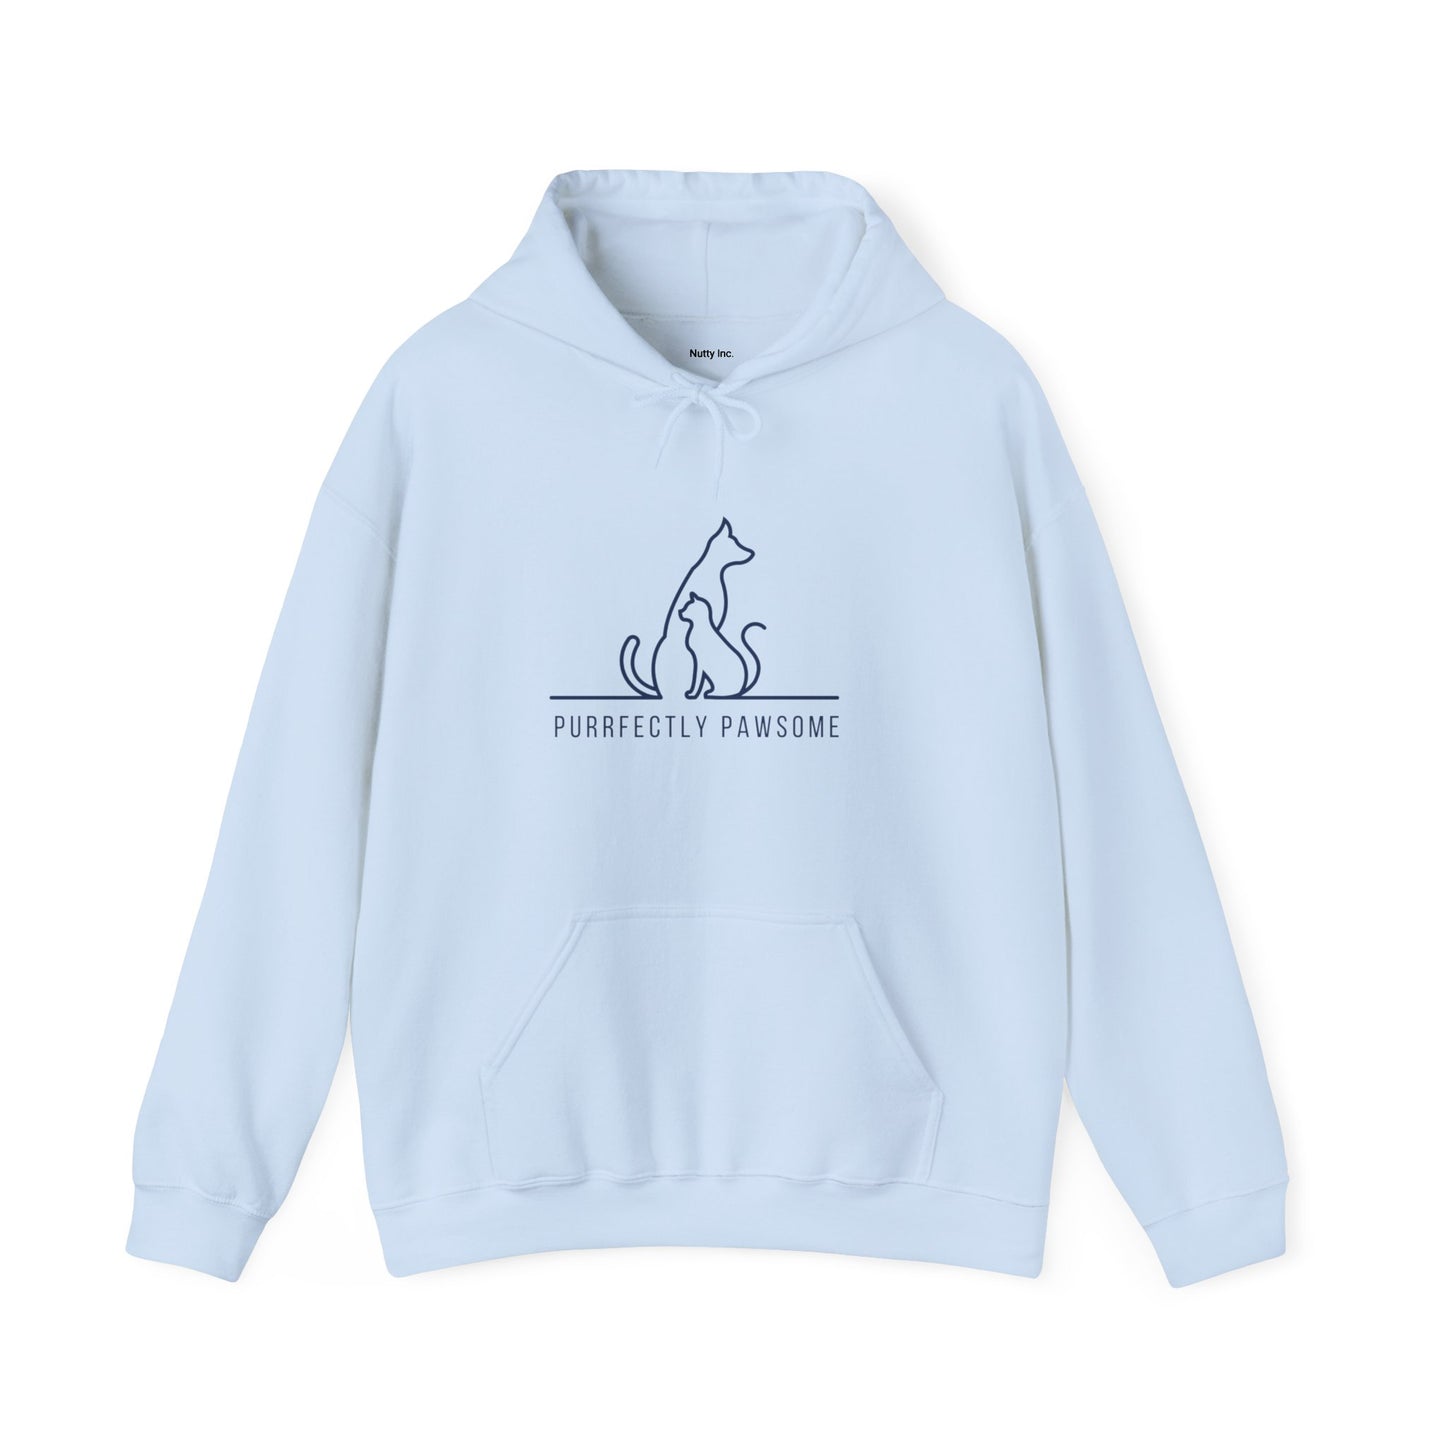 Purrfectly Pawsome Dog an Cat Silhouette. Unisex Hooded Sweatshirt.